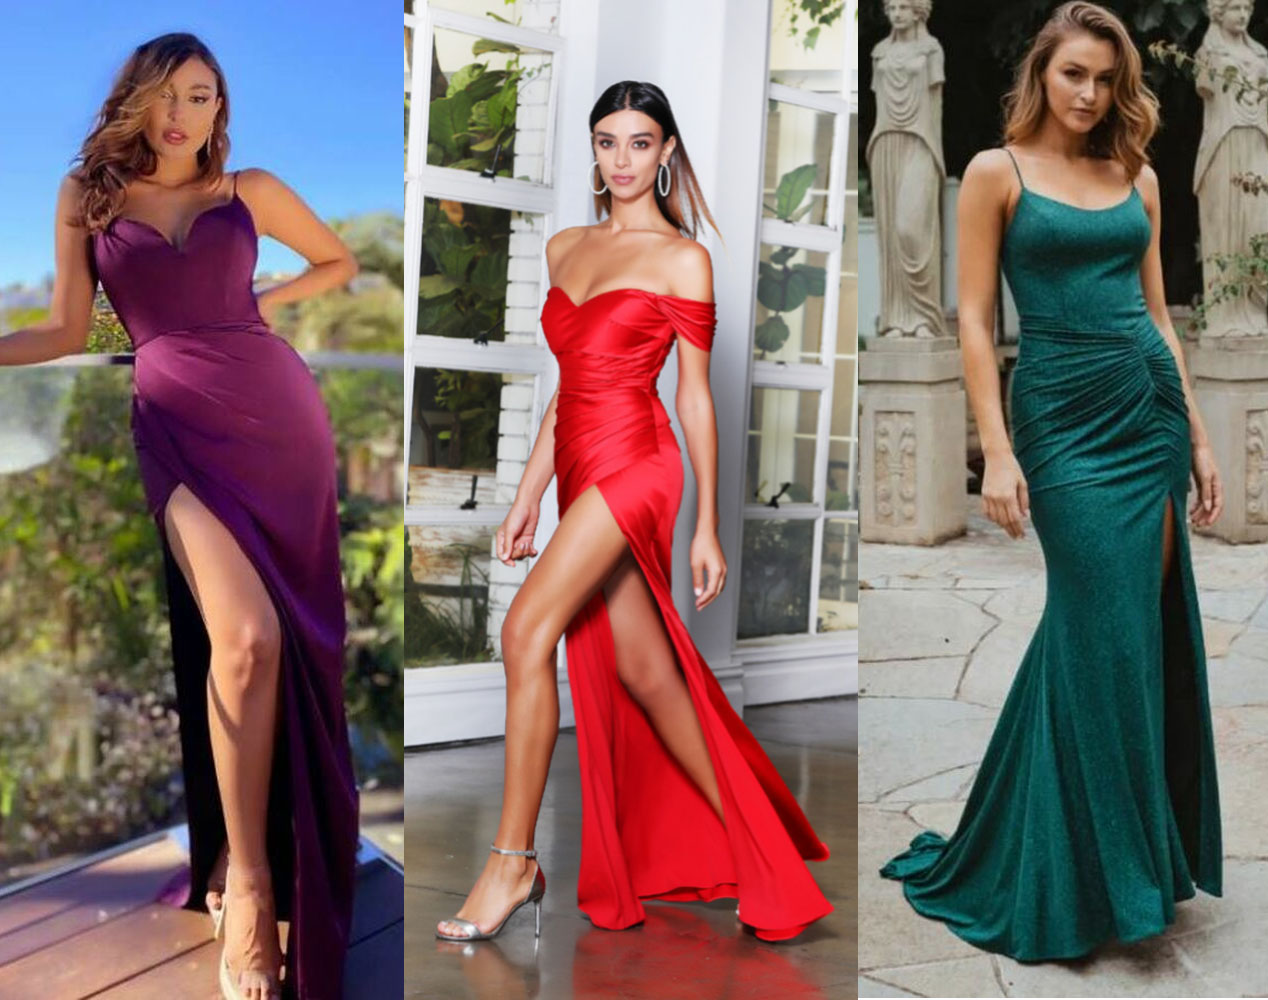 Mermaid, Bodycon and Fitted Formal Dresses Online Australia at Fashionably Yours